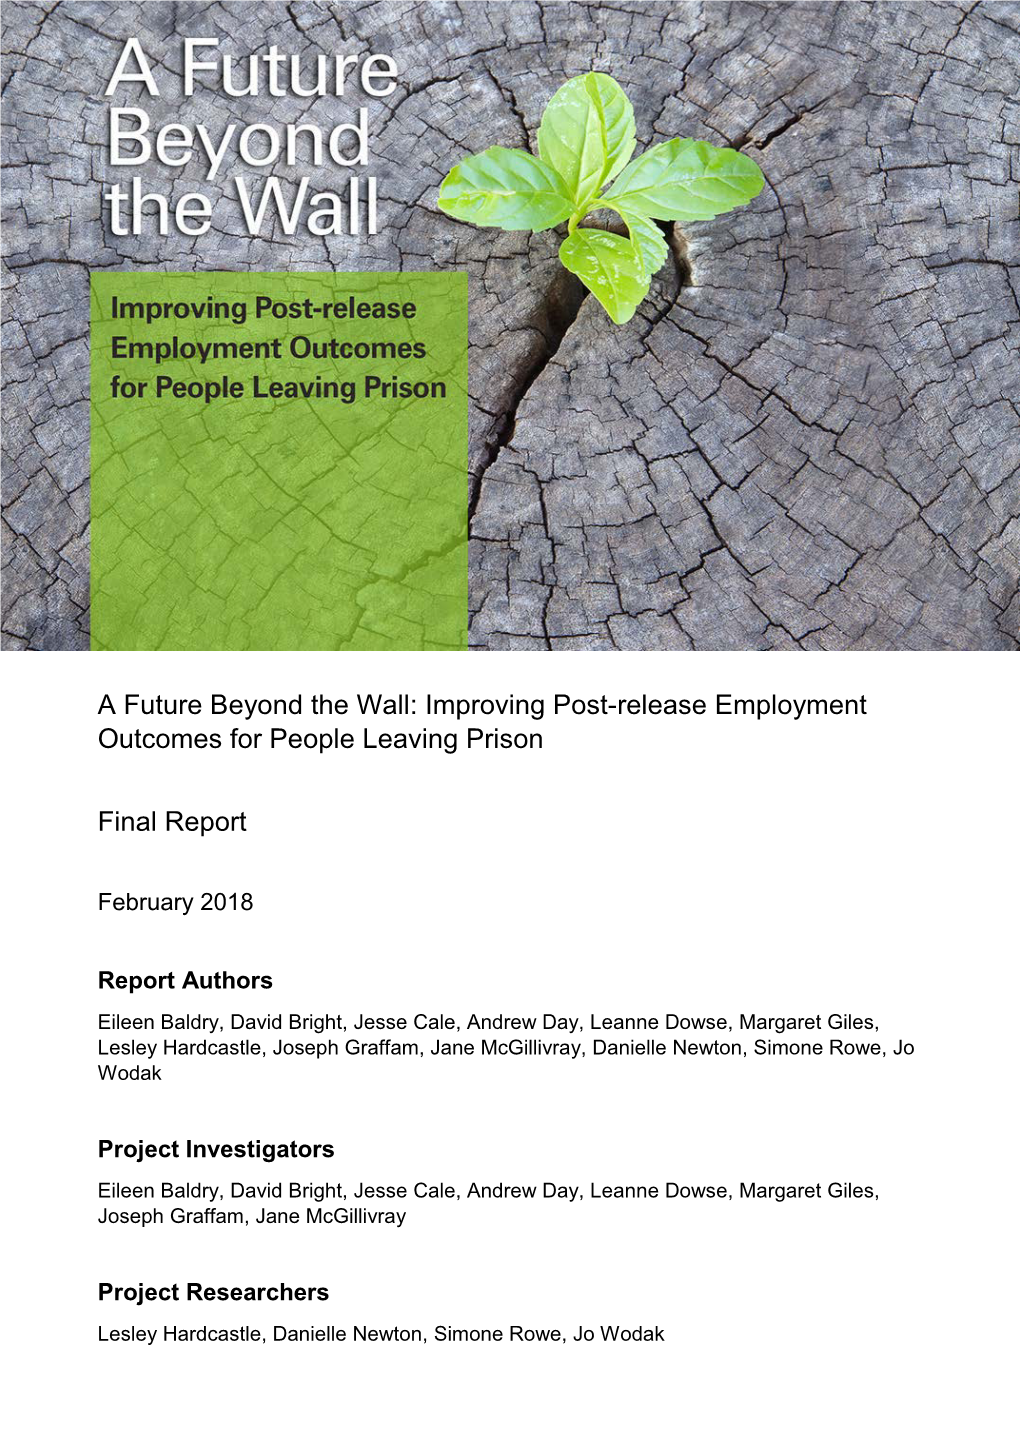 A Future Beyond the Wall: Improving Post-Release Employment Outcomes for People Leaving Prison Final Report